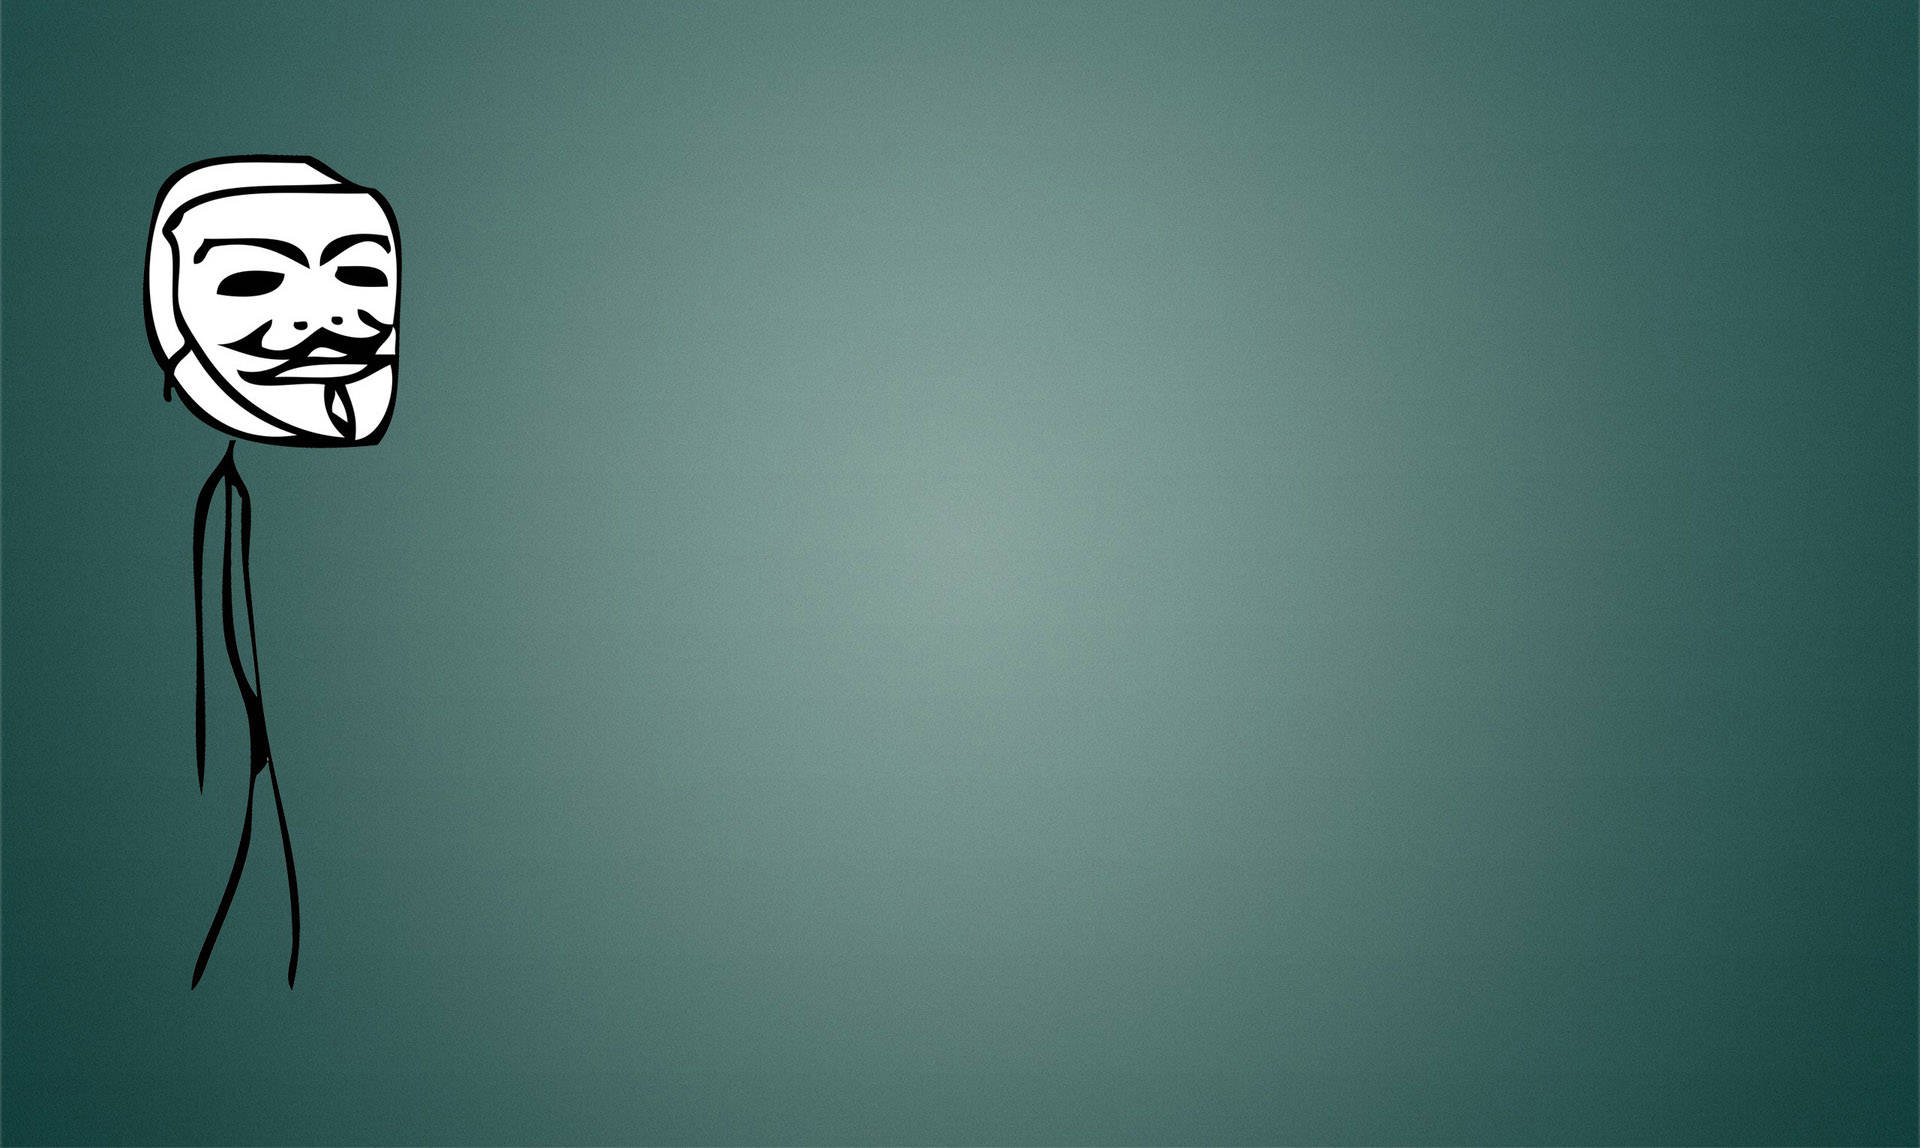 Who let the trolls out? Wallpaper